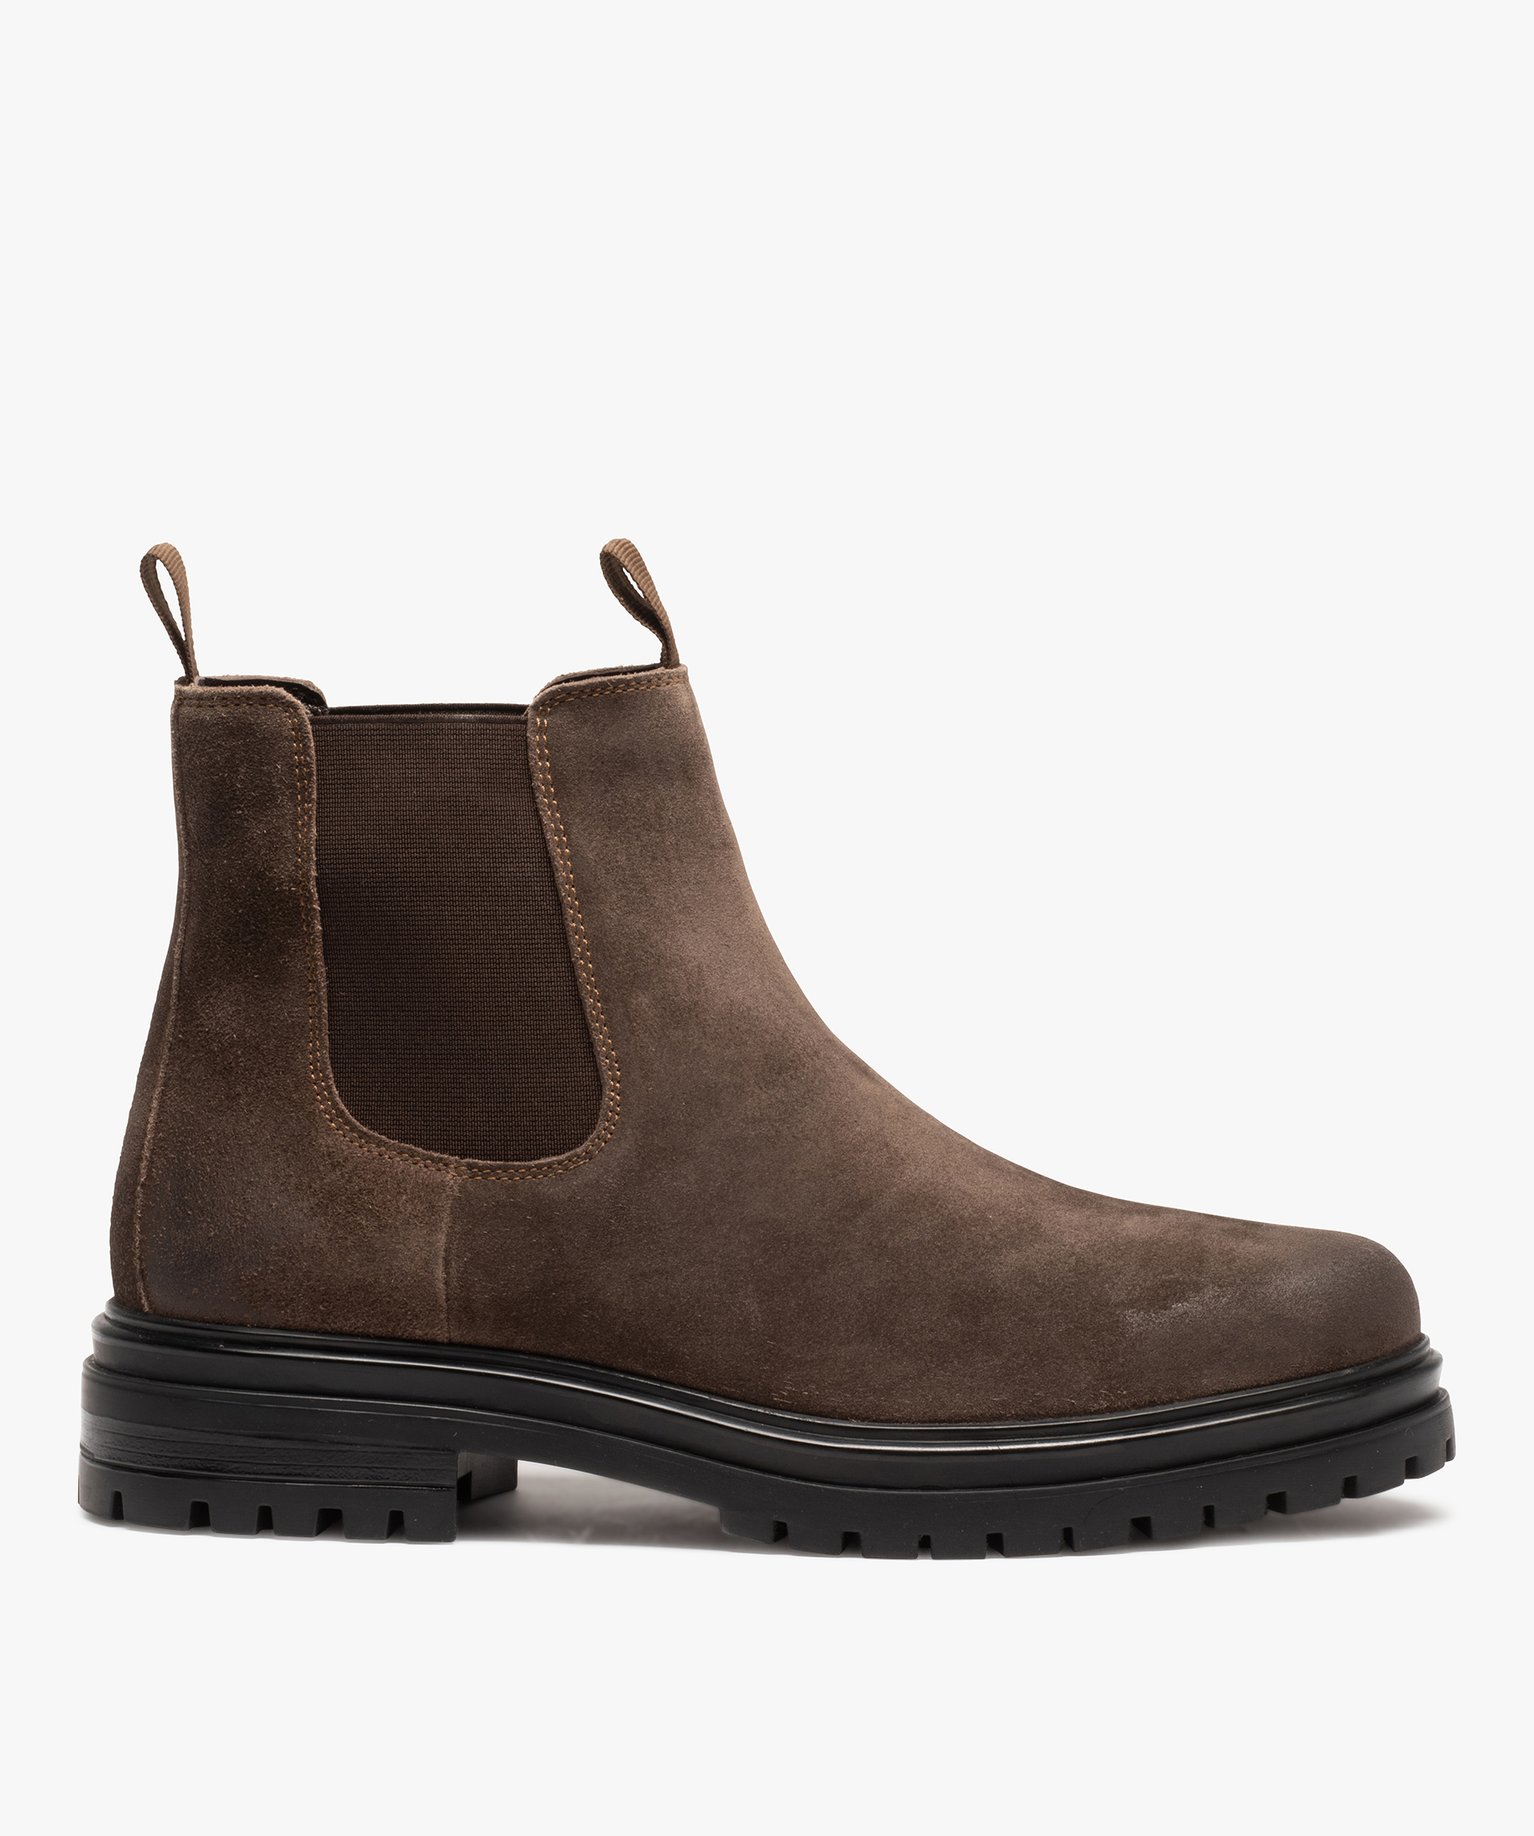 boots homme crantees style chelsea dessus cuir - taneo brun